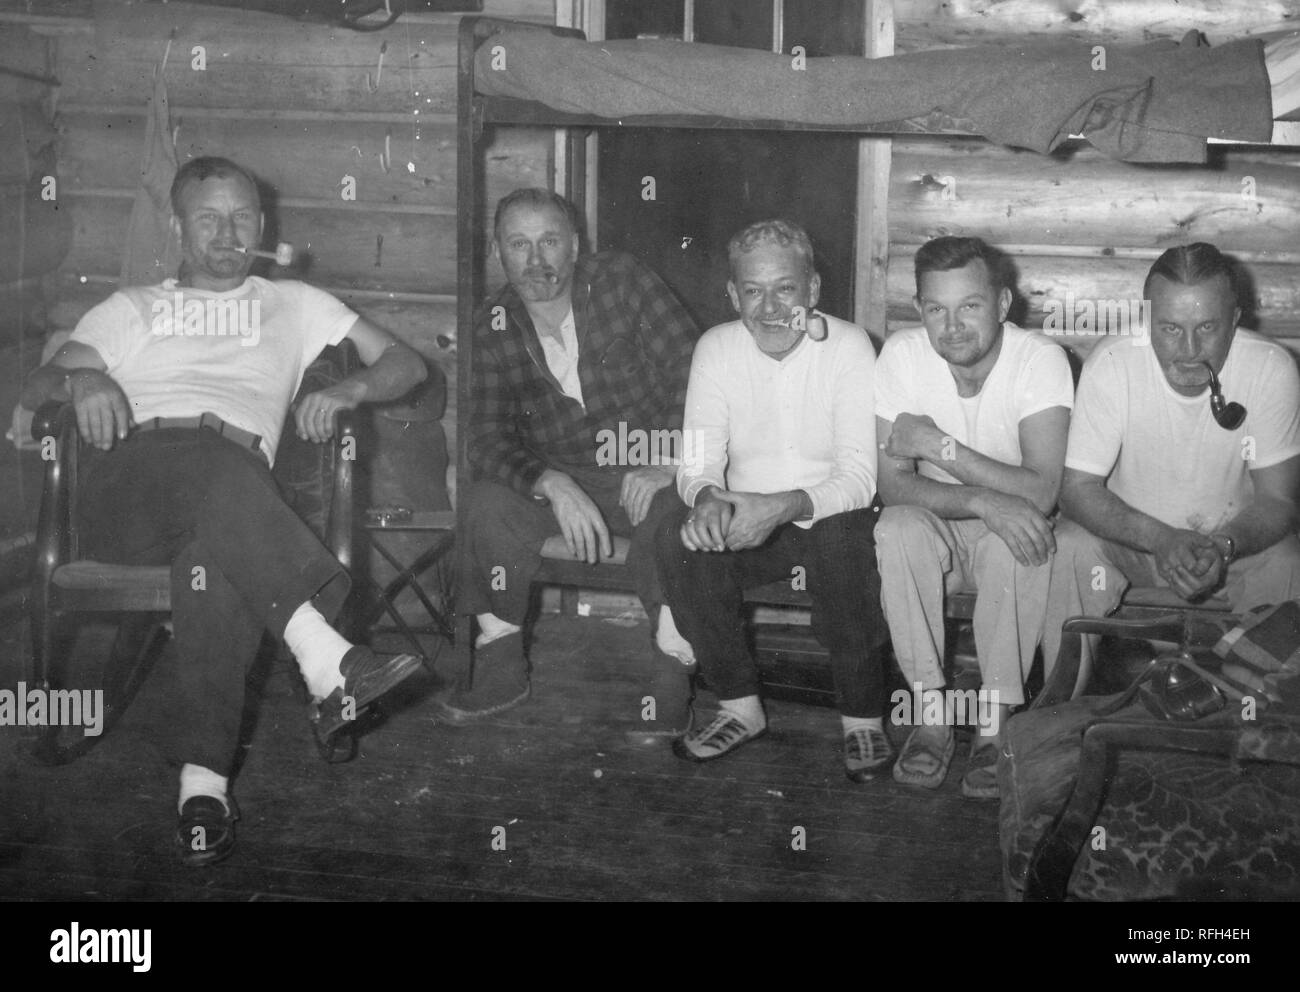 Black and white photograph of five unshaven, middle-aged men, sitting together facing the camera; one sits in a rocking chair smoking a pipe, and the other four (three smoking pipes) sit closely next to each other on the bottom bunk of a camp bed, photographed during a hunting and fishing trip located in Alaska, USA, 1955. () Stock Photo